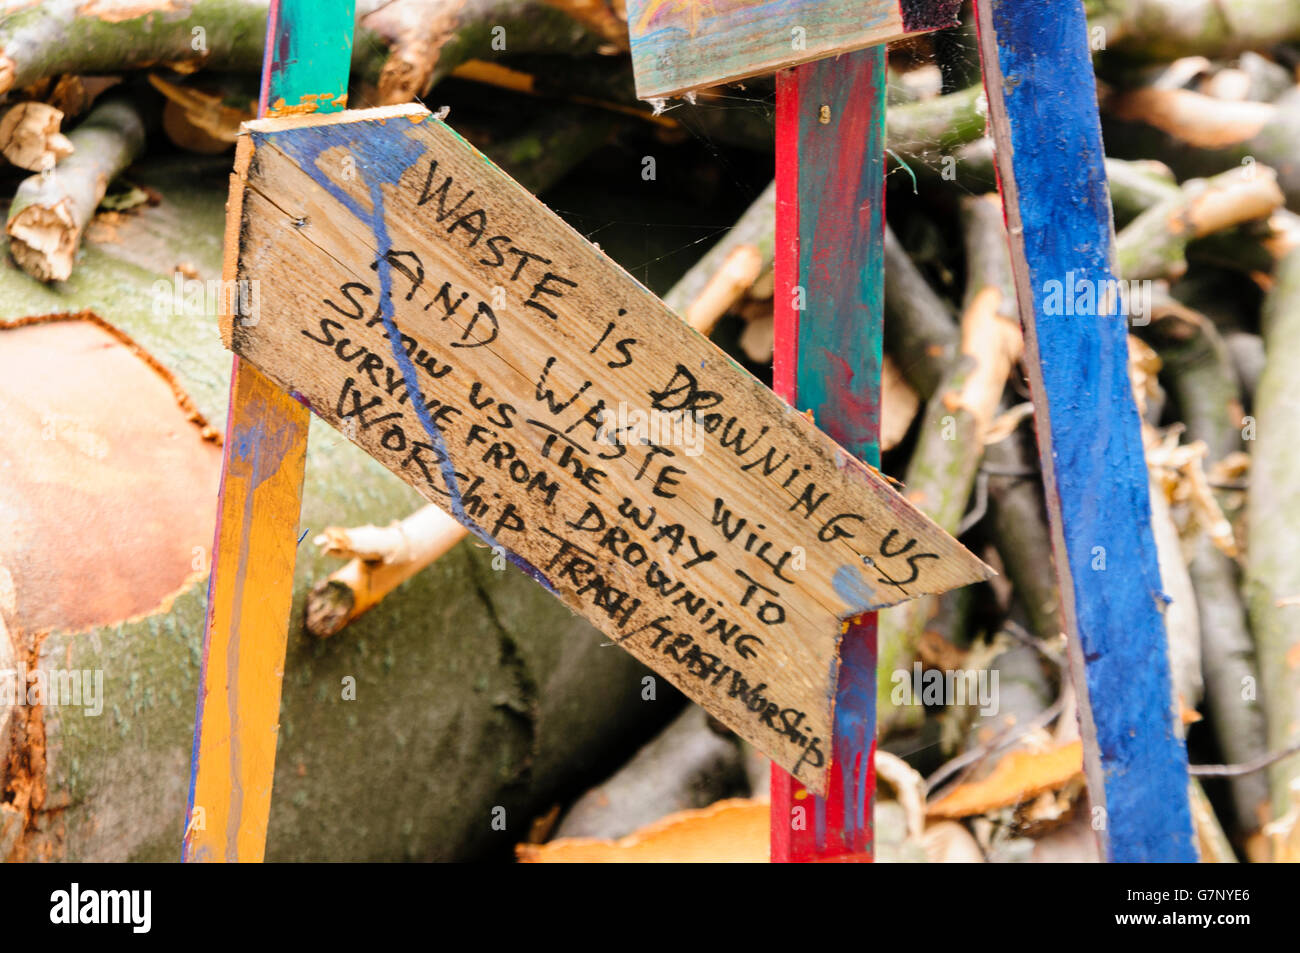 Sign saying 'Waste is drowning us and waste will show us the way to survive from drowning. Worship trash/trash worship.' beside a pile of wooden logs. Stock Photo